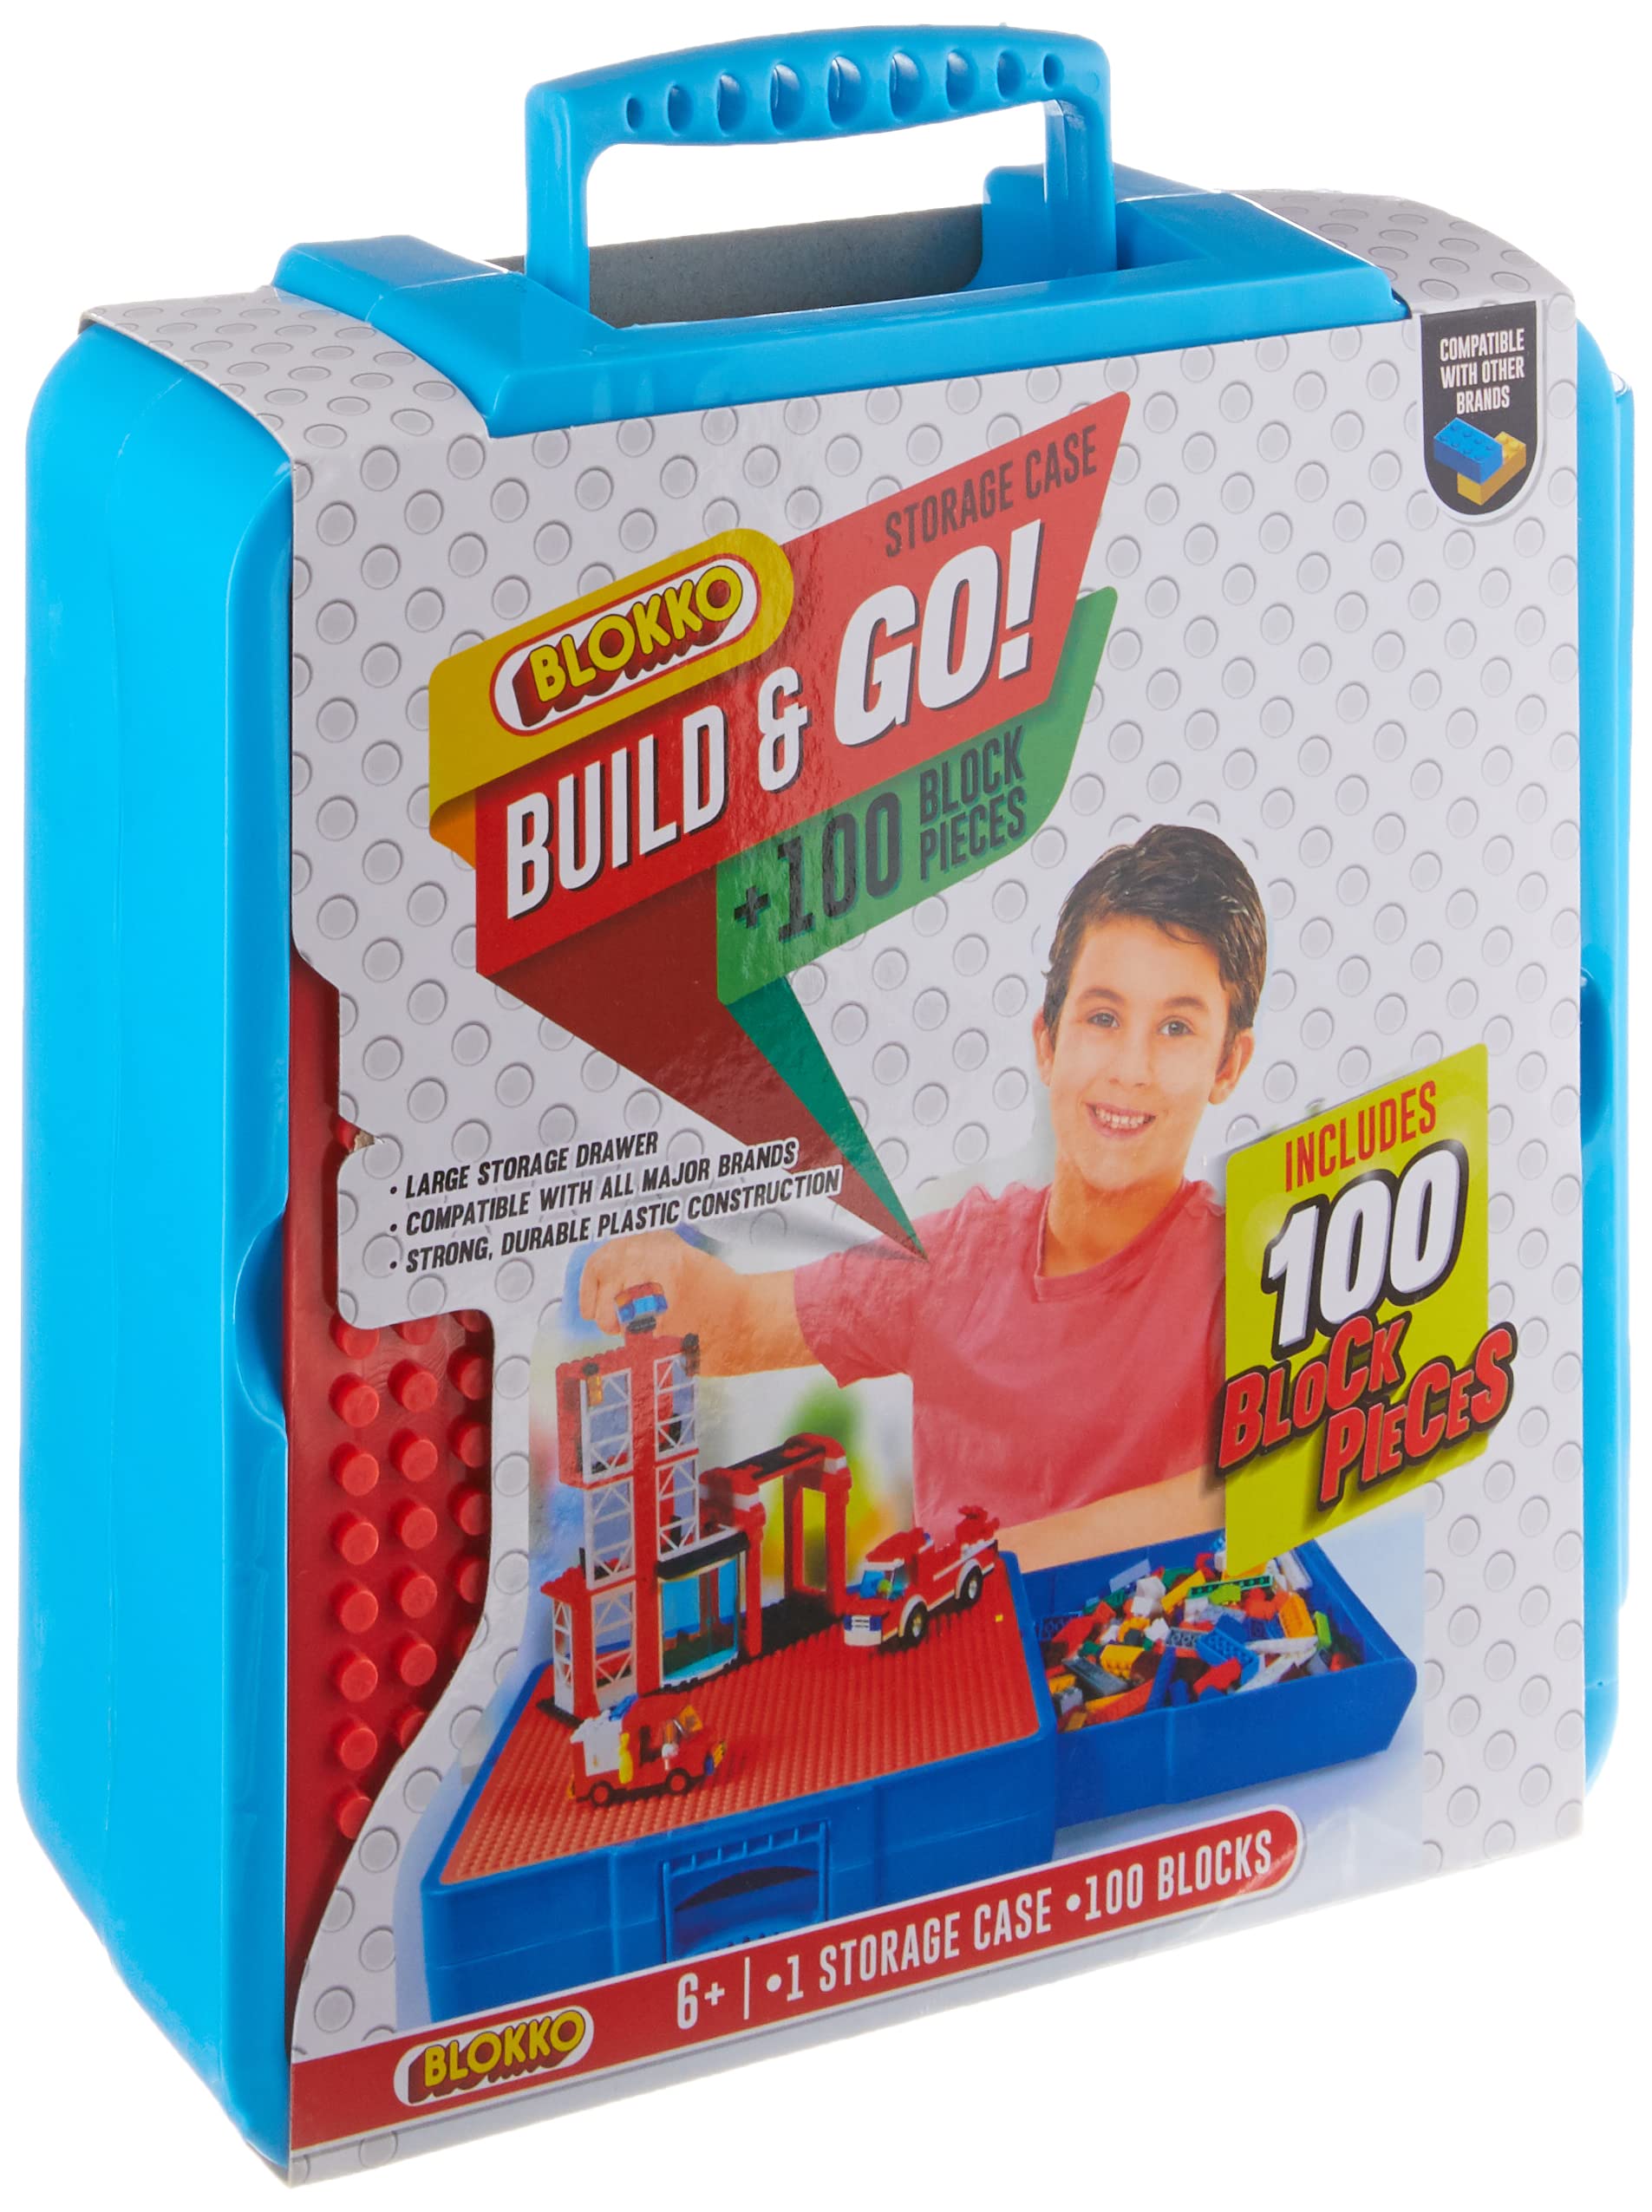 Build & Go Storage Case with 100 Blocks - Kid's Building Block Portable Storage Case - Children's Travel Building Bock Set - Includes 100 Blocks & Compatible With Other Leading Brands